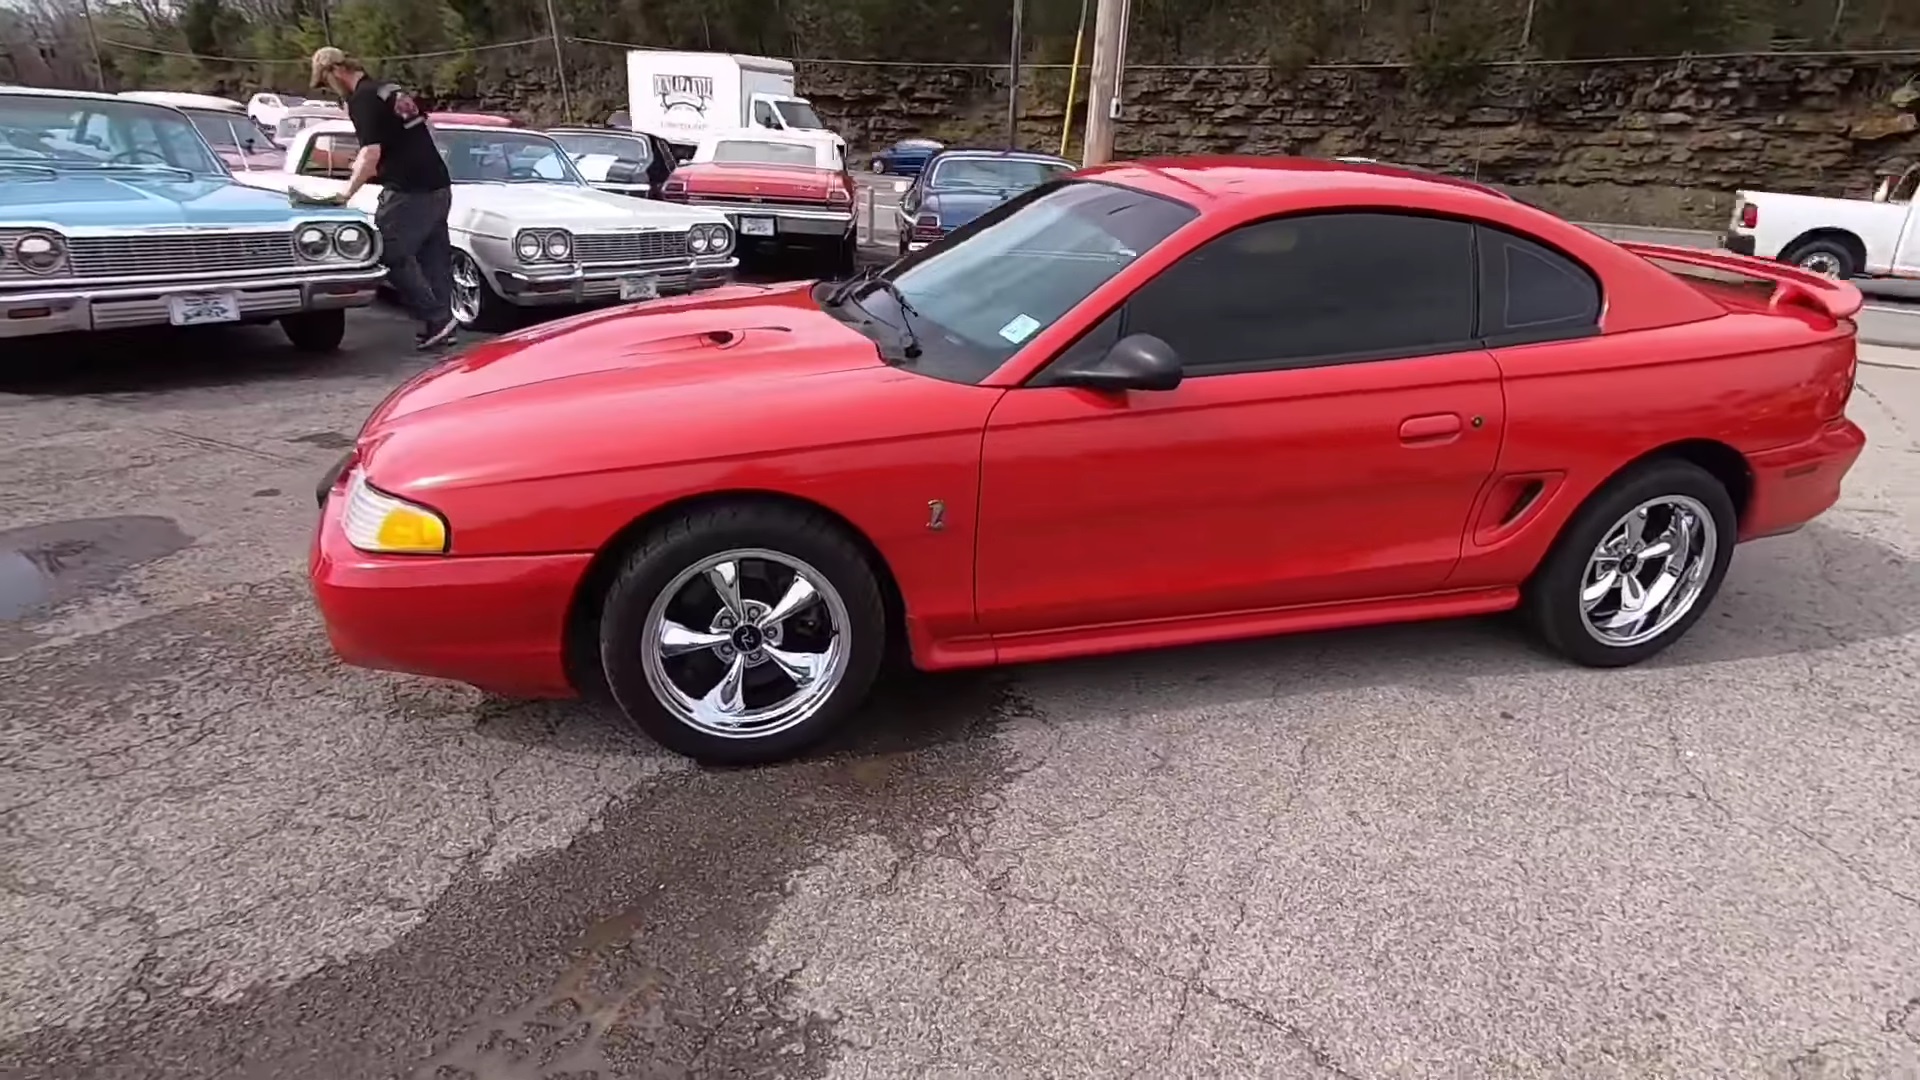 Video: 1997 Ford Mustang Cobra Test Drive